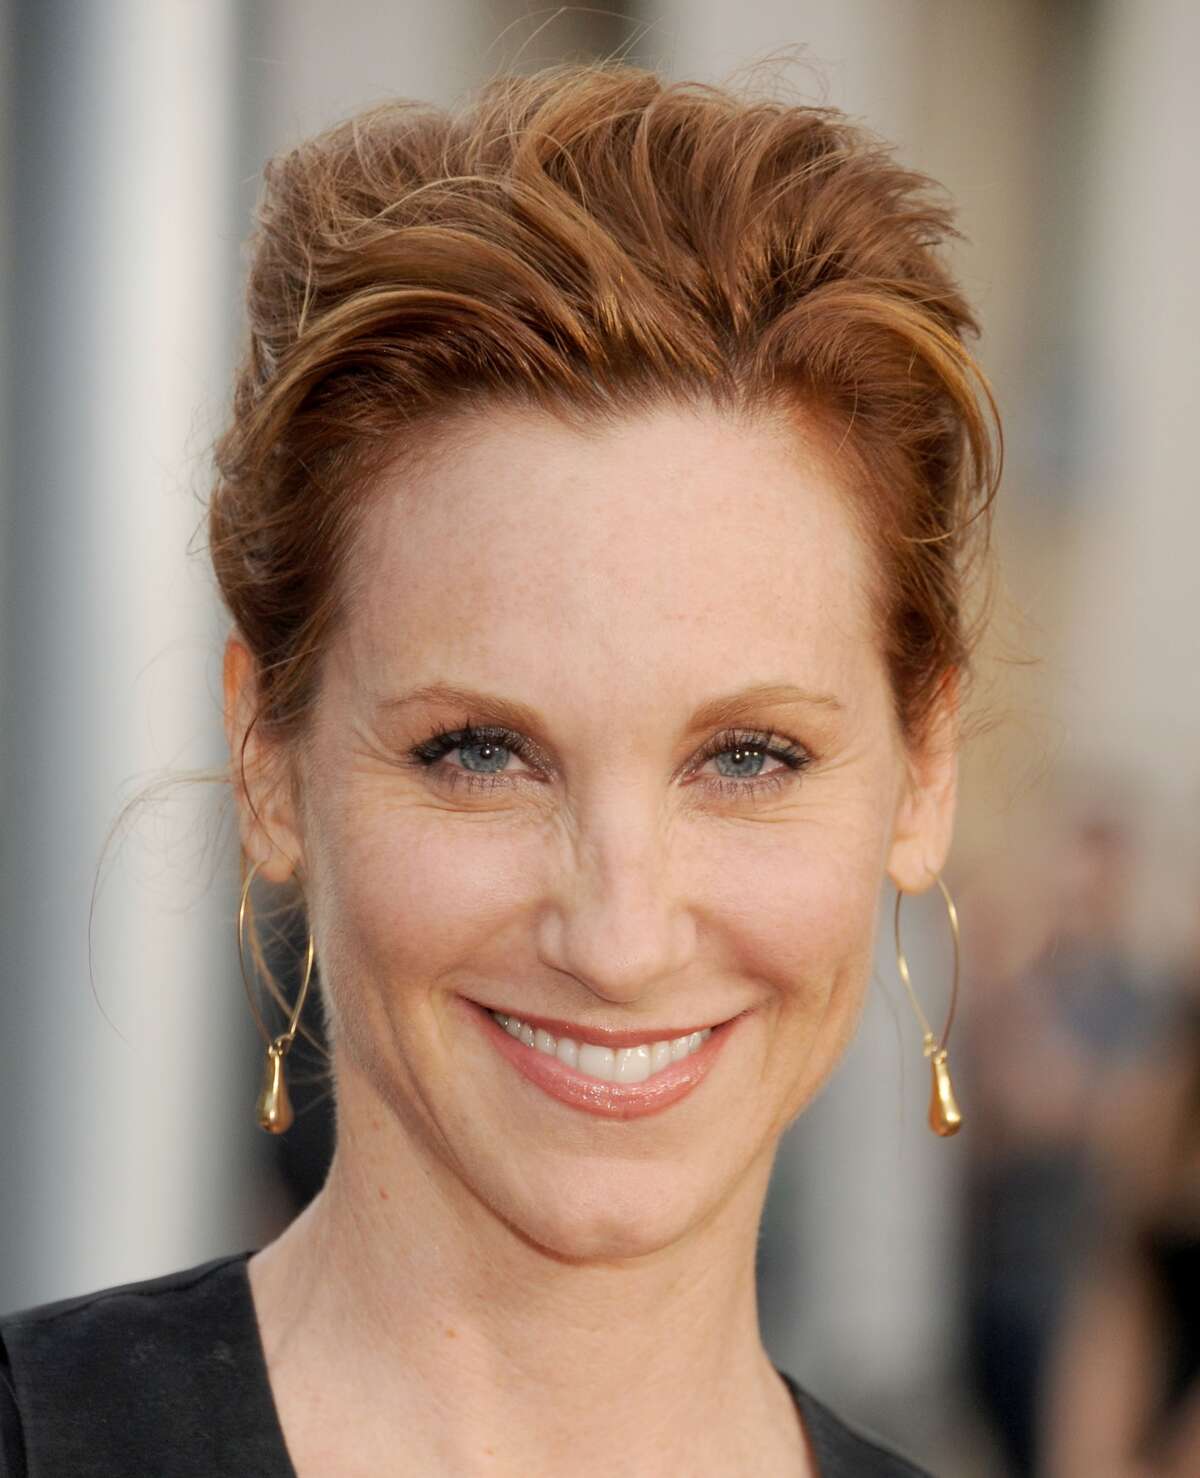 Actress Judith Hoag played April O'Neil in the original "Teenage Mutant Ninja Turtles" movie. Here she is, pictured in 2013.KEEP CLICKING TO SEE MORE OF WHAT YOUR FAVORITE 1990S STARS LOOK LIKE NOW.